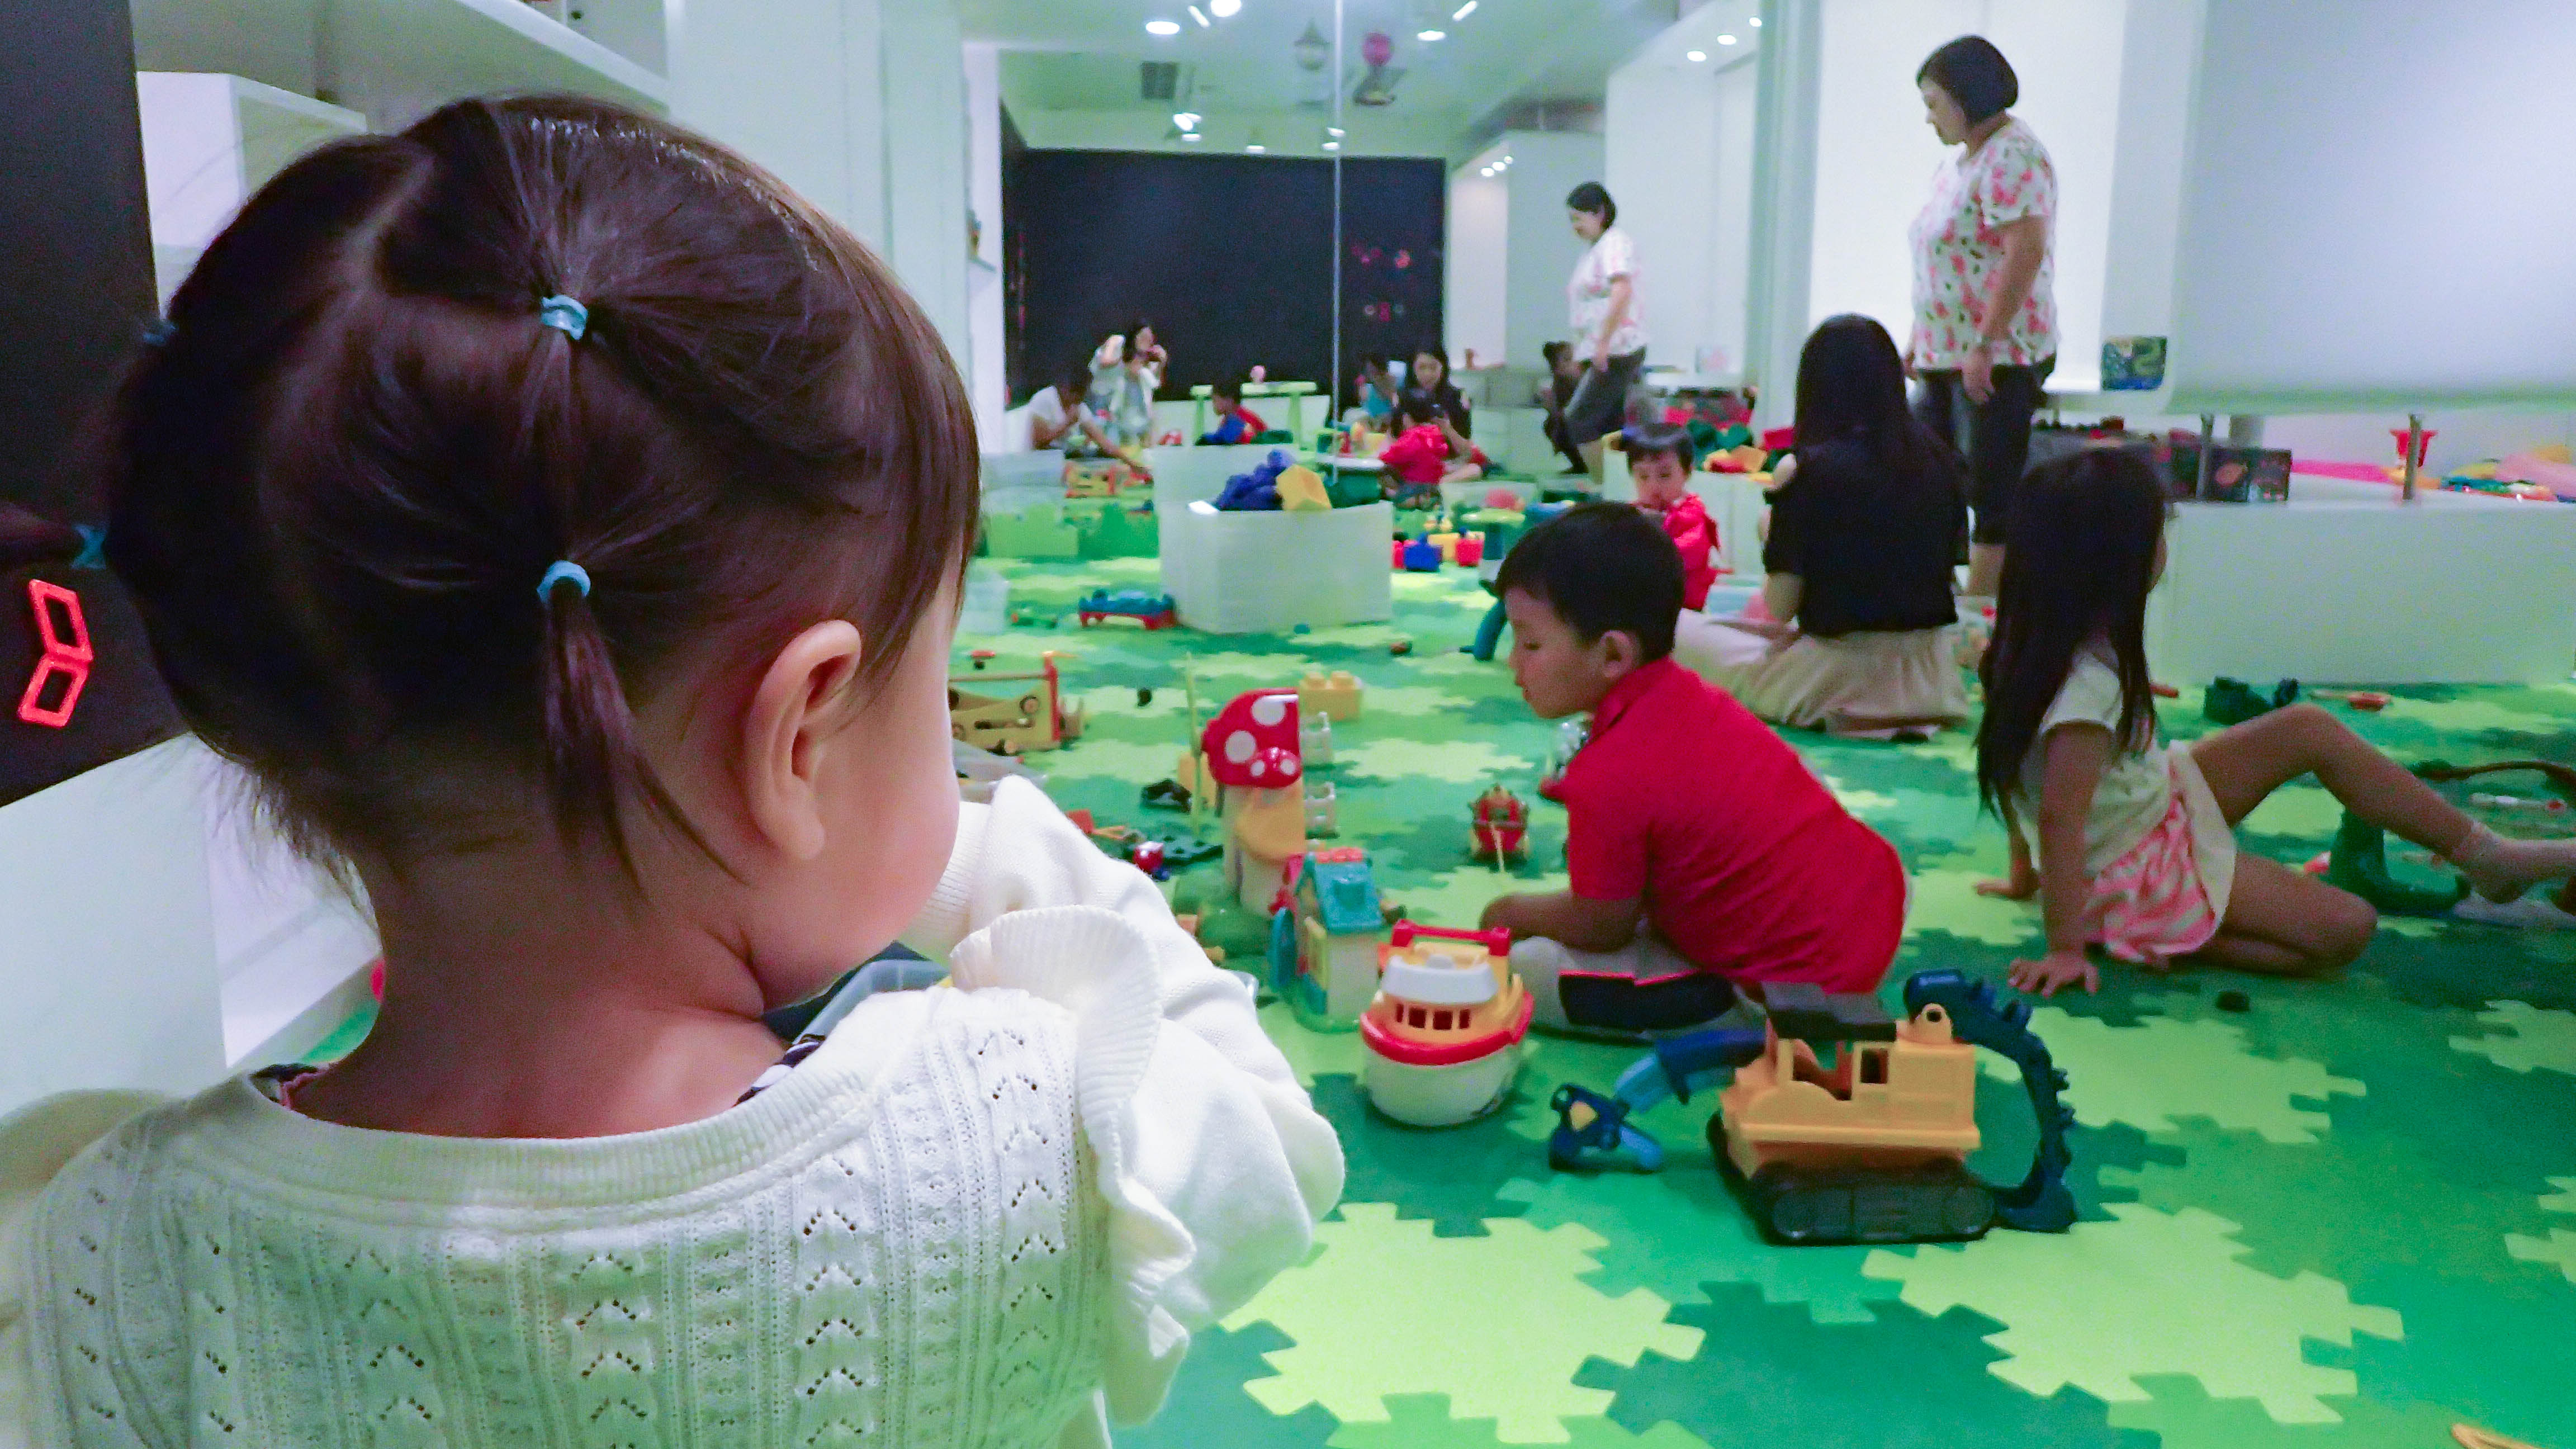 [Play Date] Free of Charge Play Area in Causeway Bay